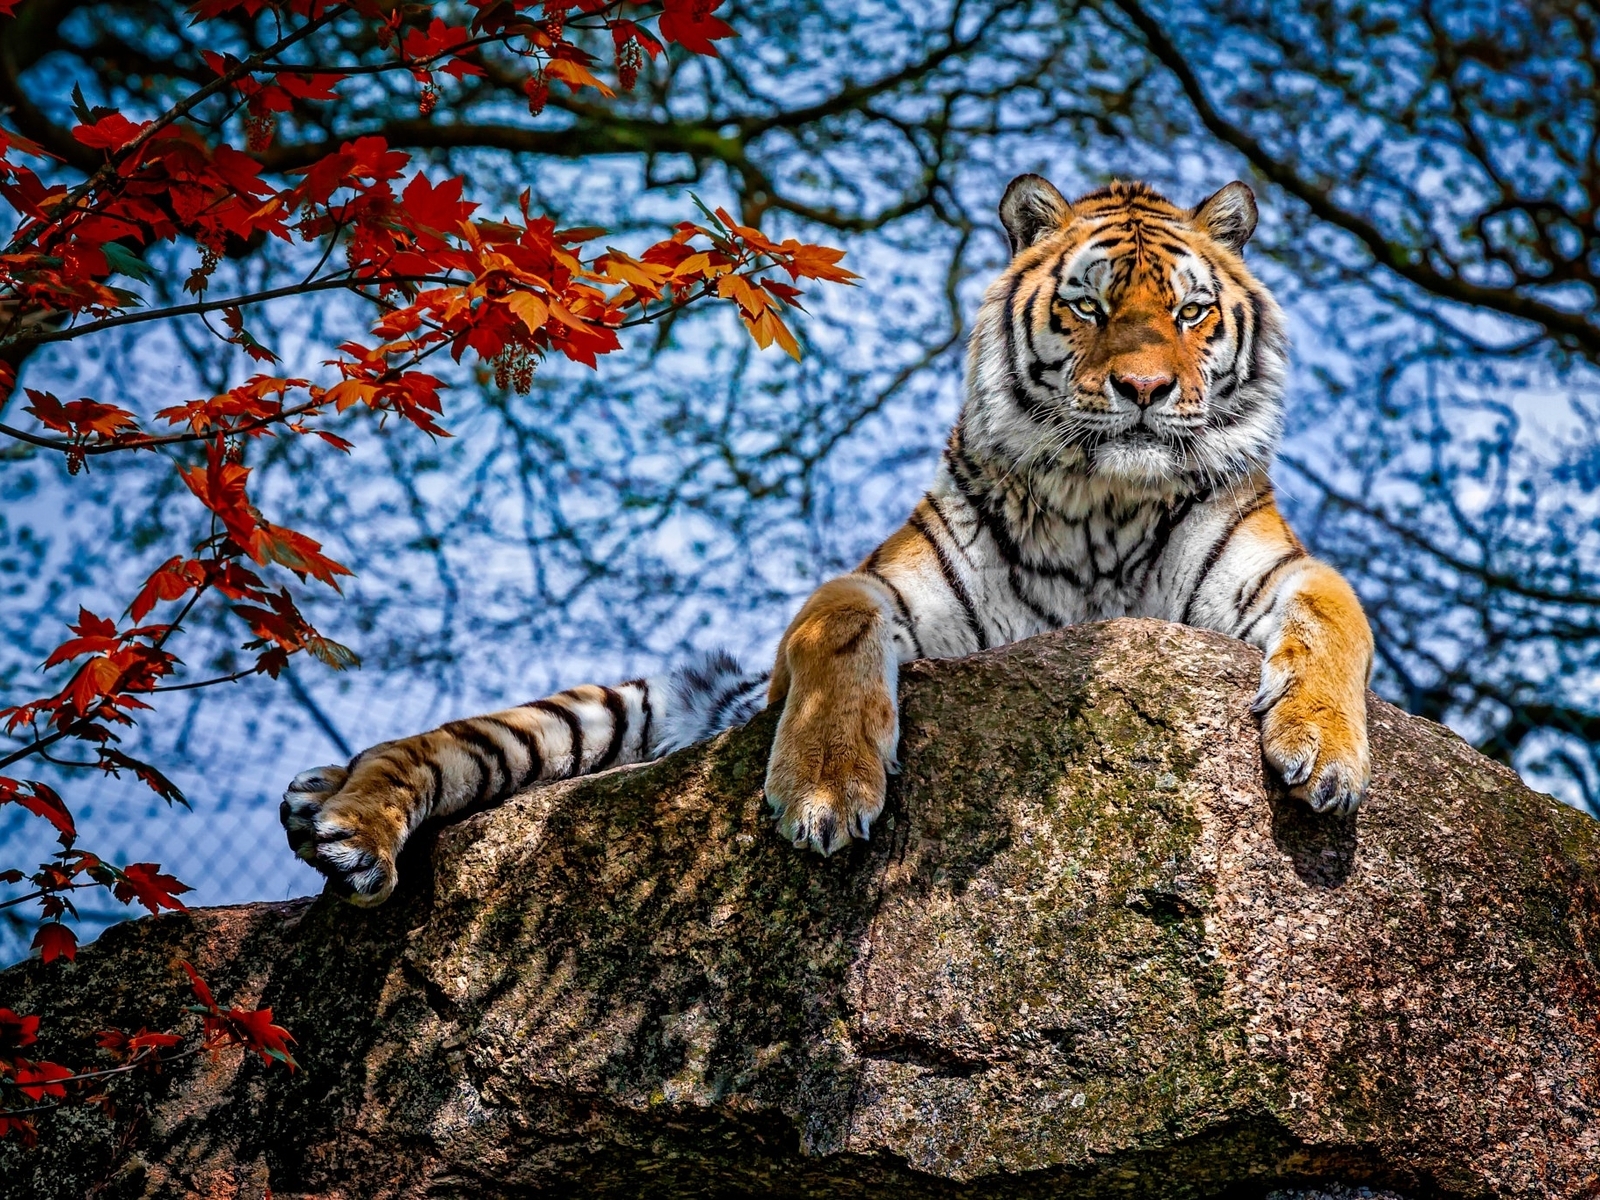 Image: Tiger, cat, predator, stone, rest, branches, trees, leaves